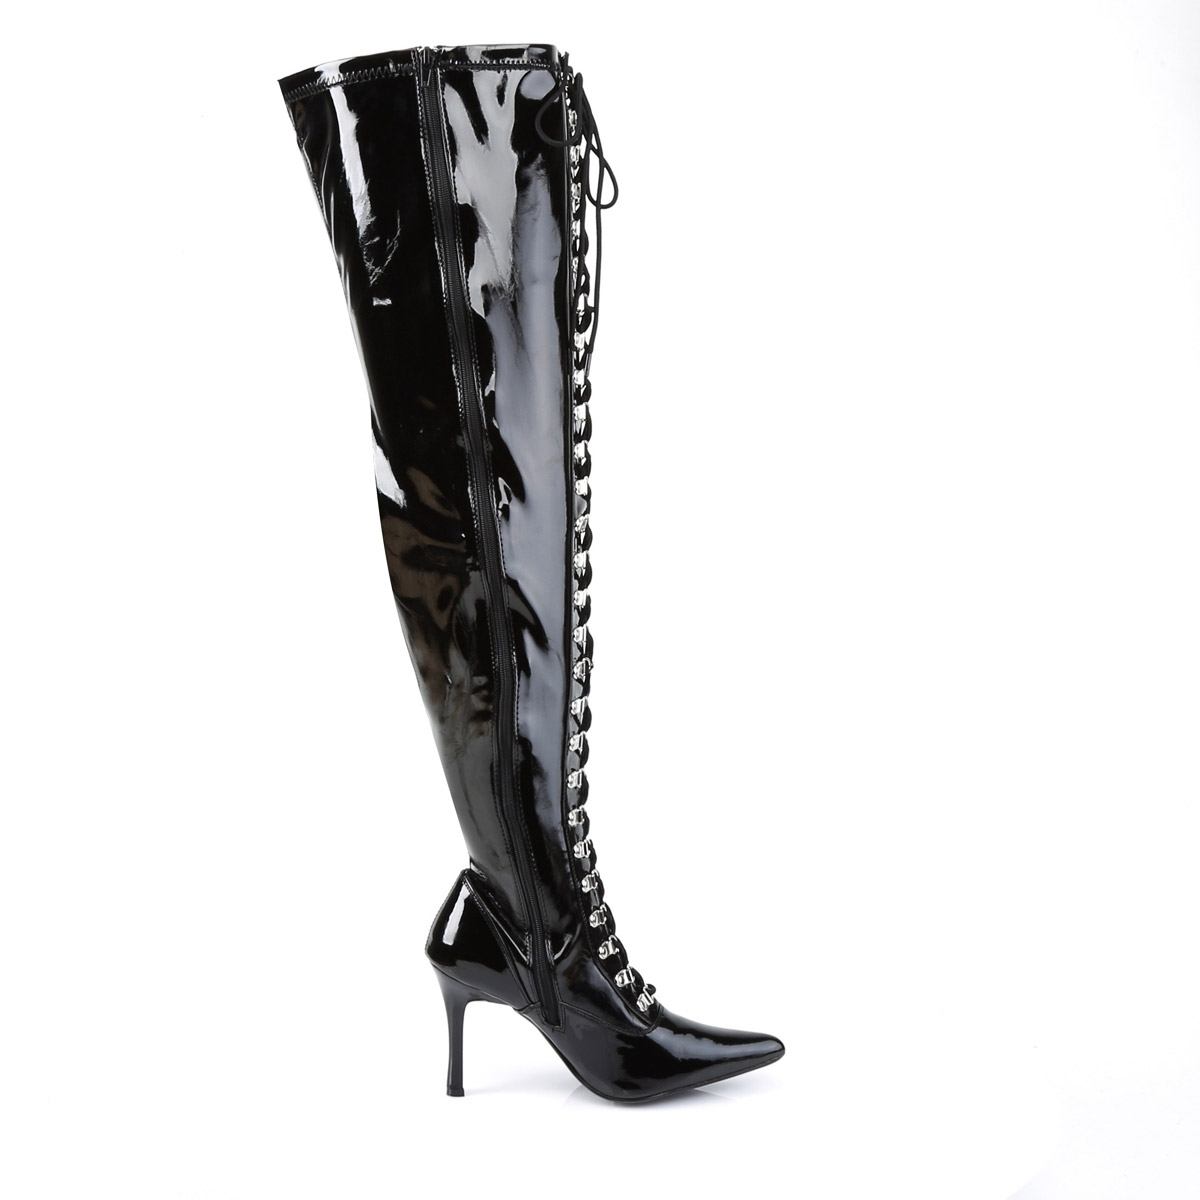 Details about   Pleaser Funtasma Wide Shaft Lace Up Thigh High Boots Adult Women DOMINATRIX3024X 